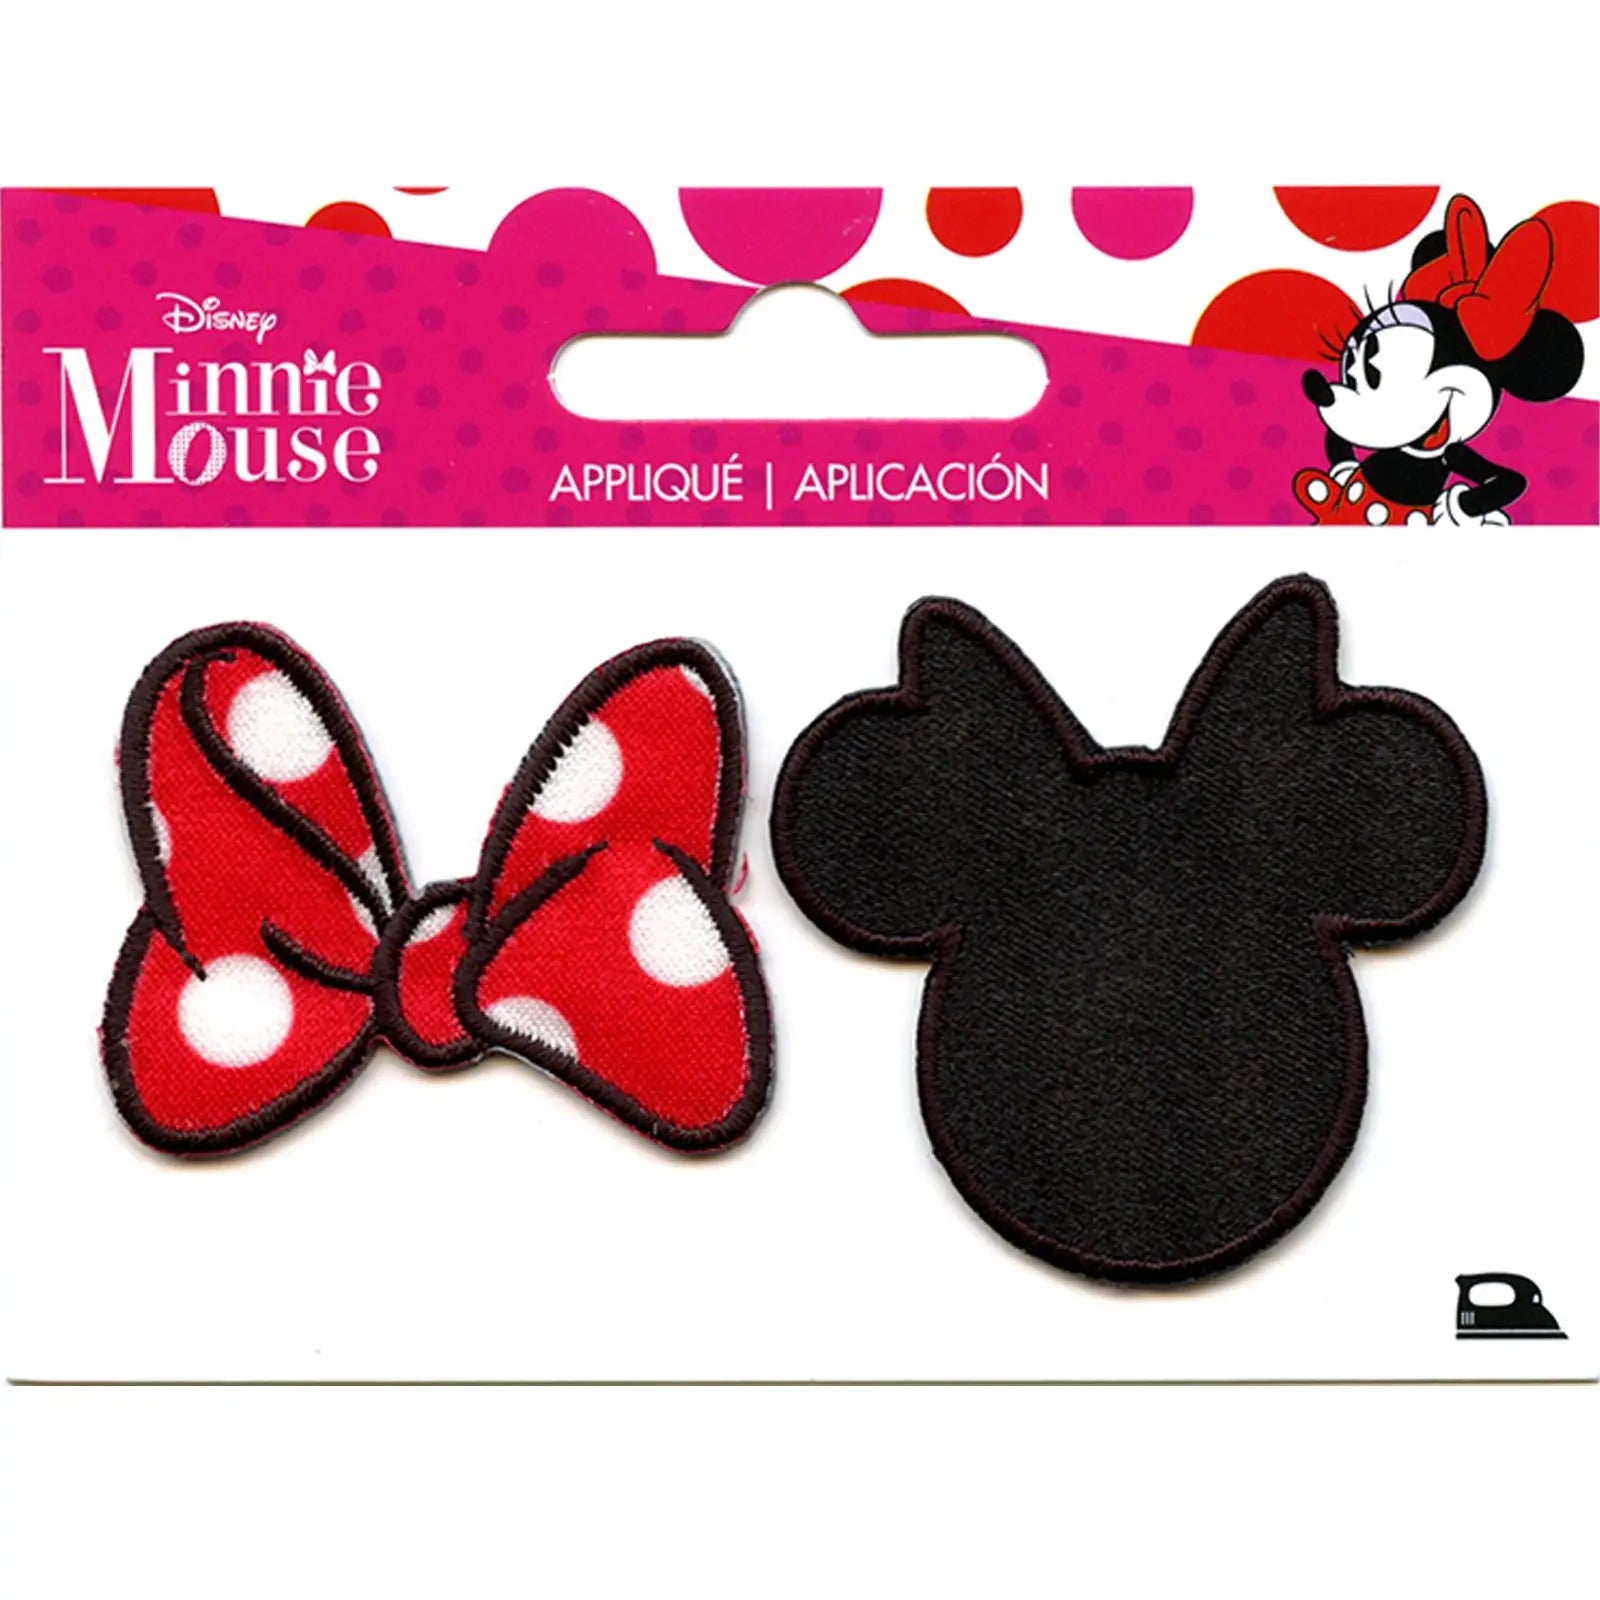 Disney Minnie Mouse Red Bow and Silhouette Iron on Applique Patch 